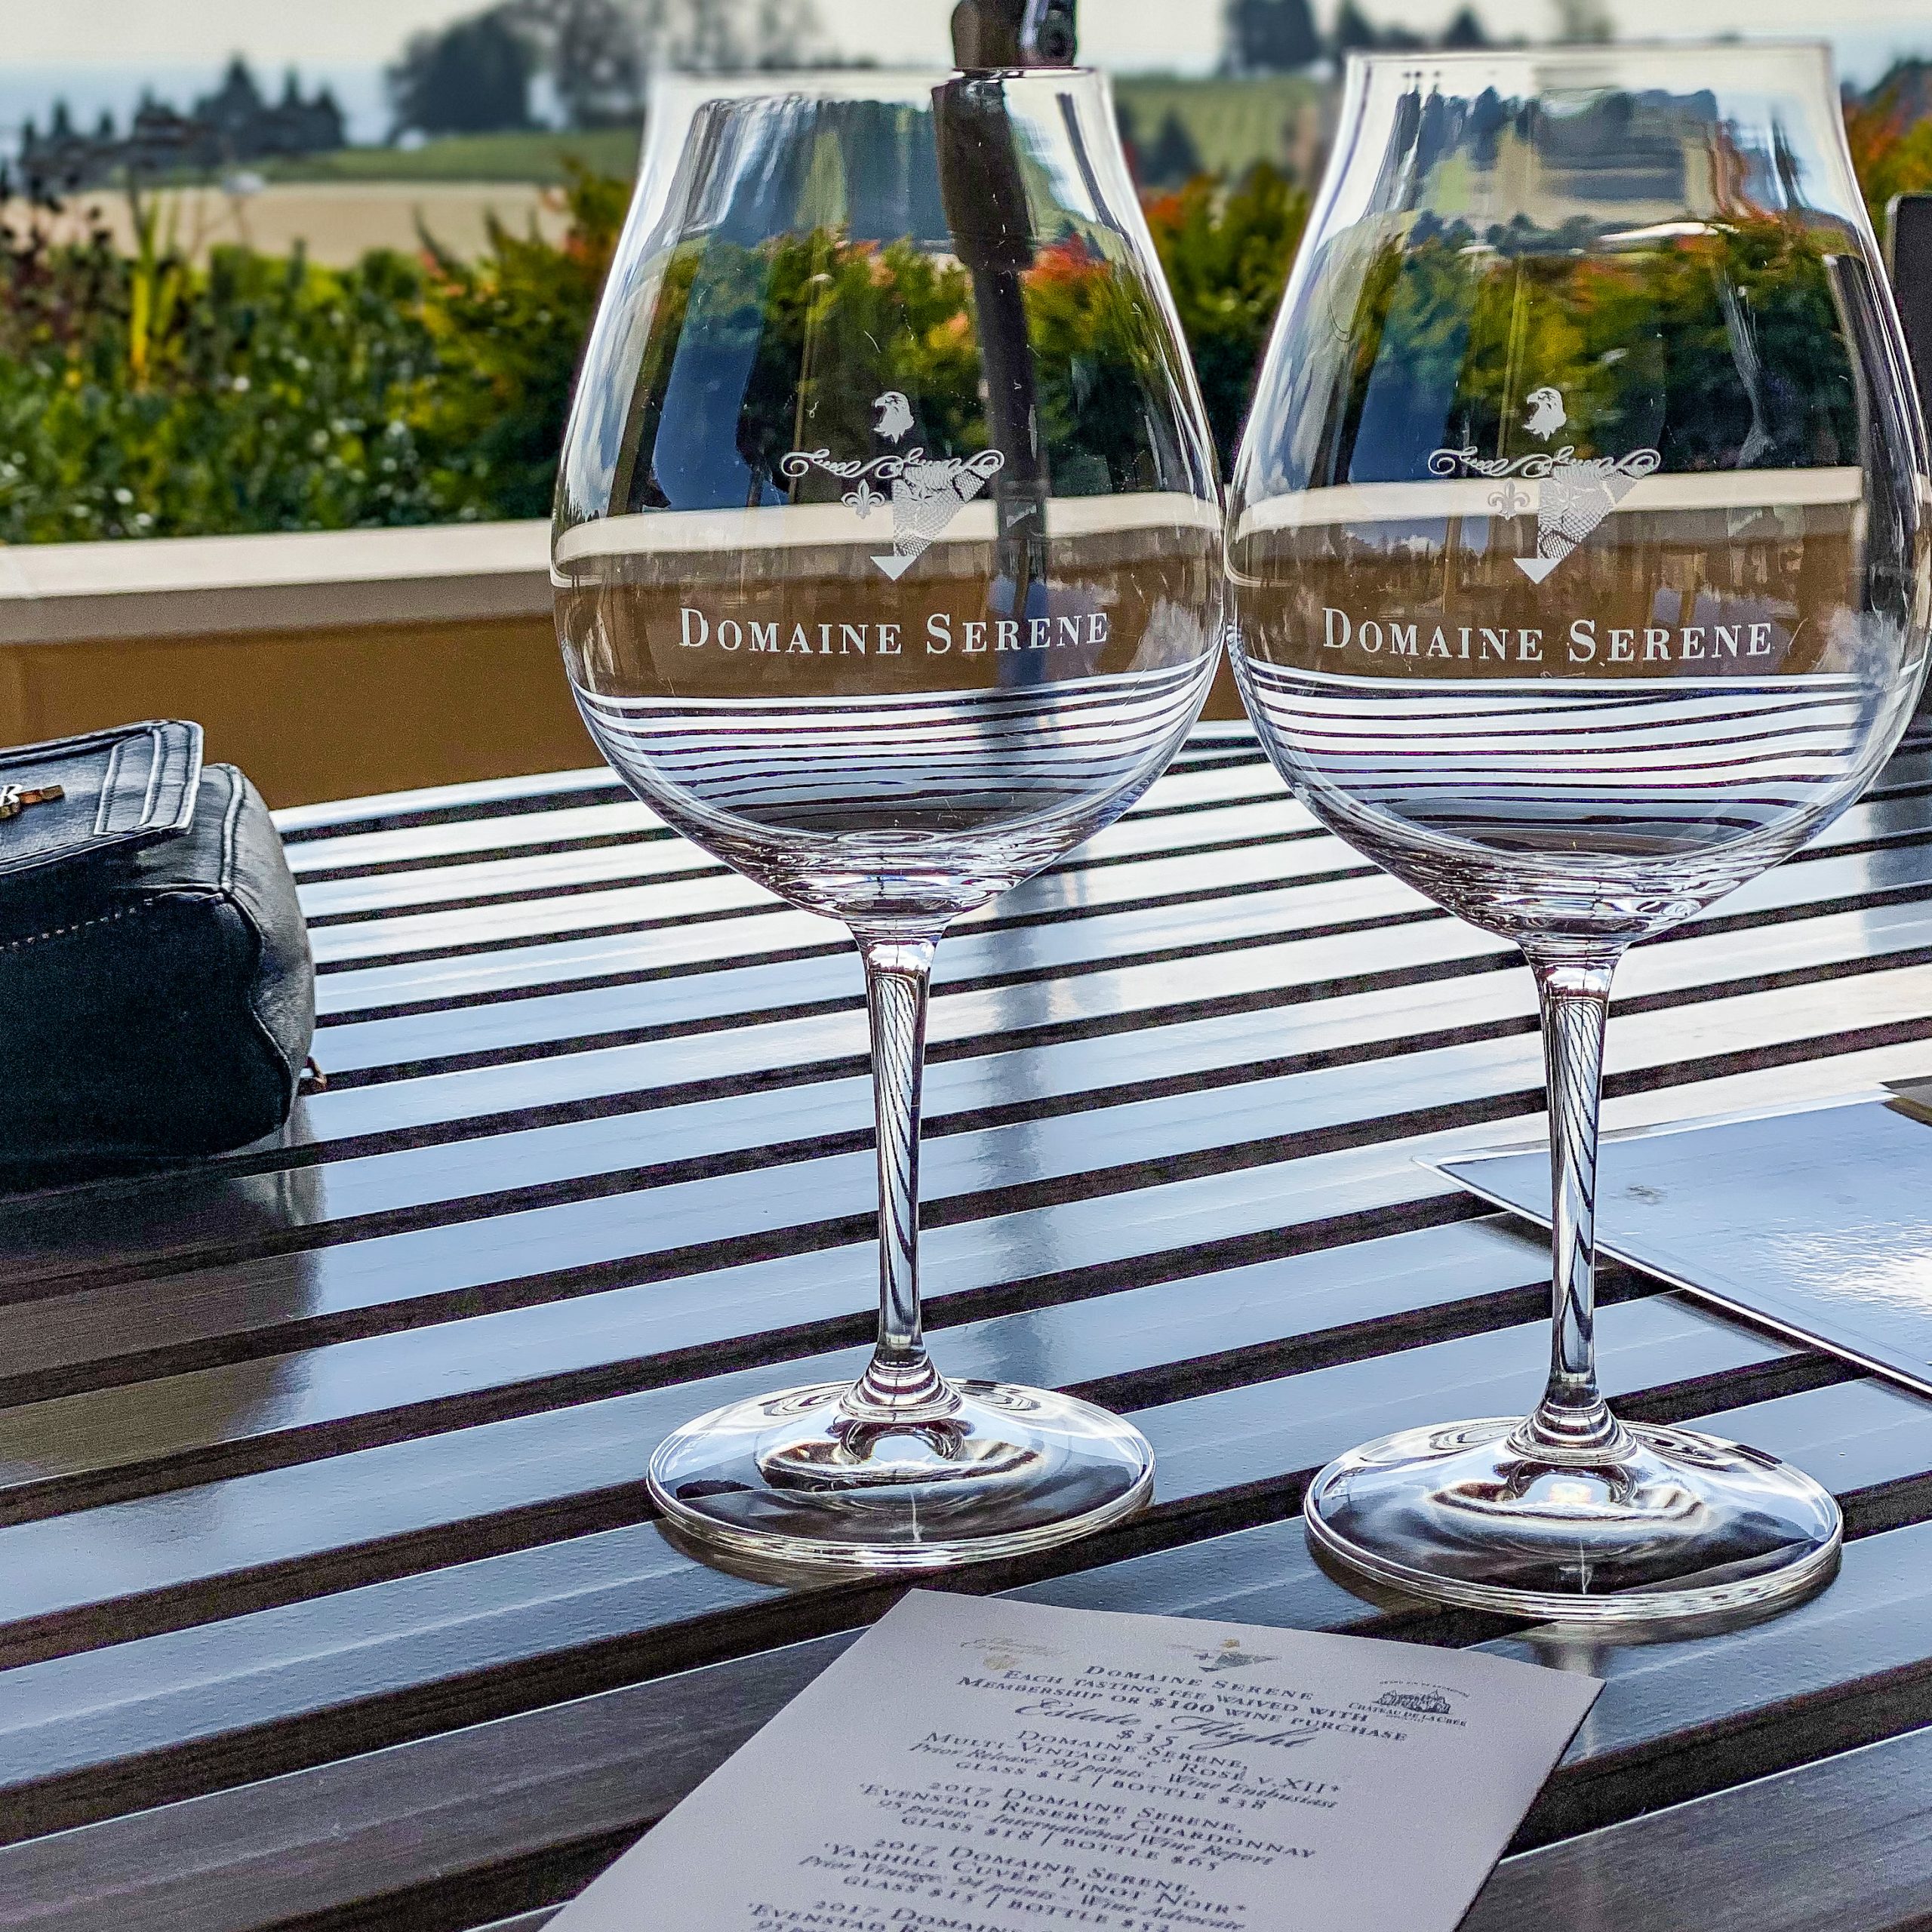 The best wineries in Willamette Valley. Domaine Serene. Dayton, Oregon. Willamette Valley wineries.